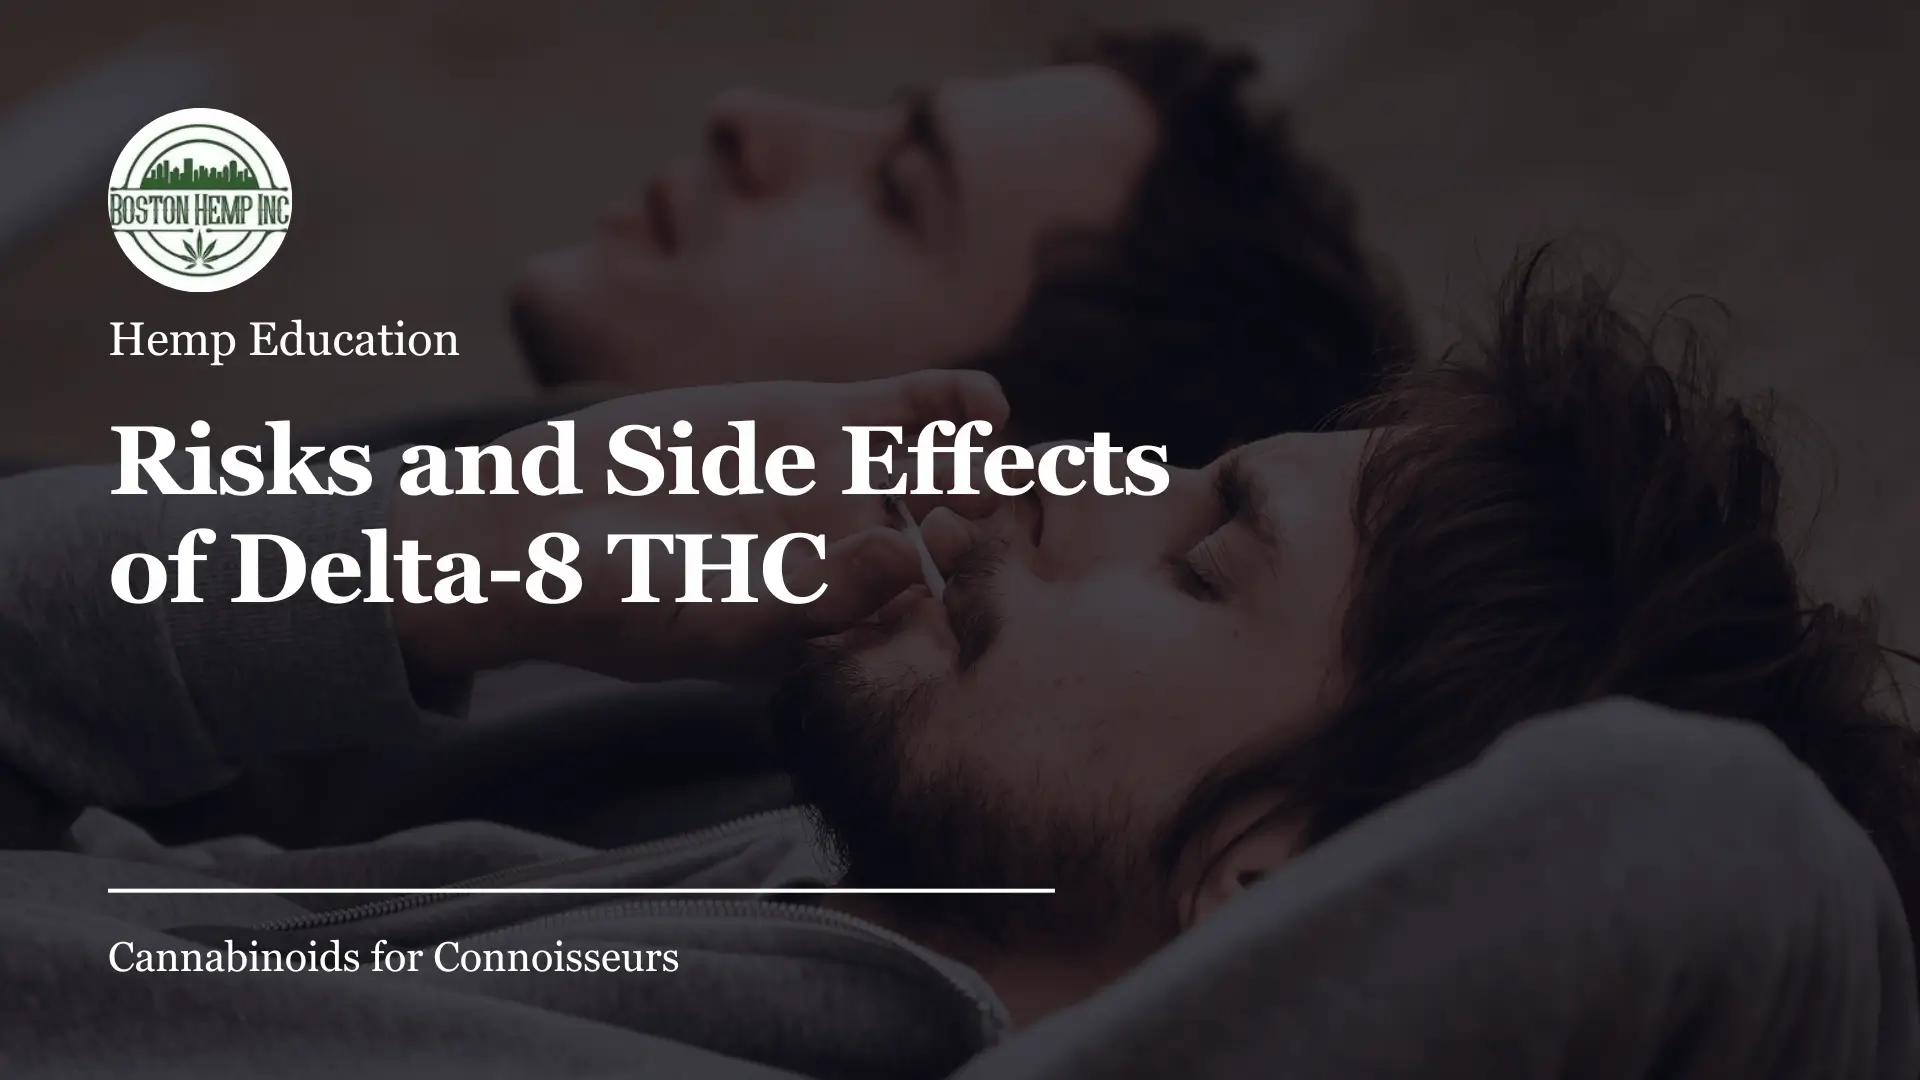 Risks and Side Effects of Delta-8 THC